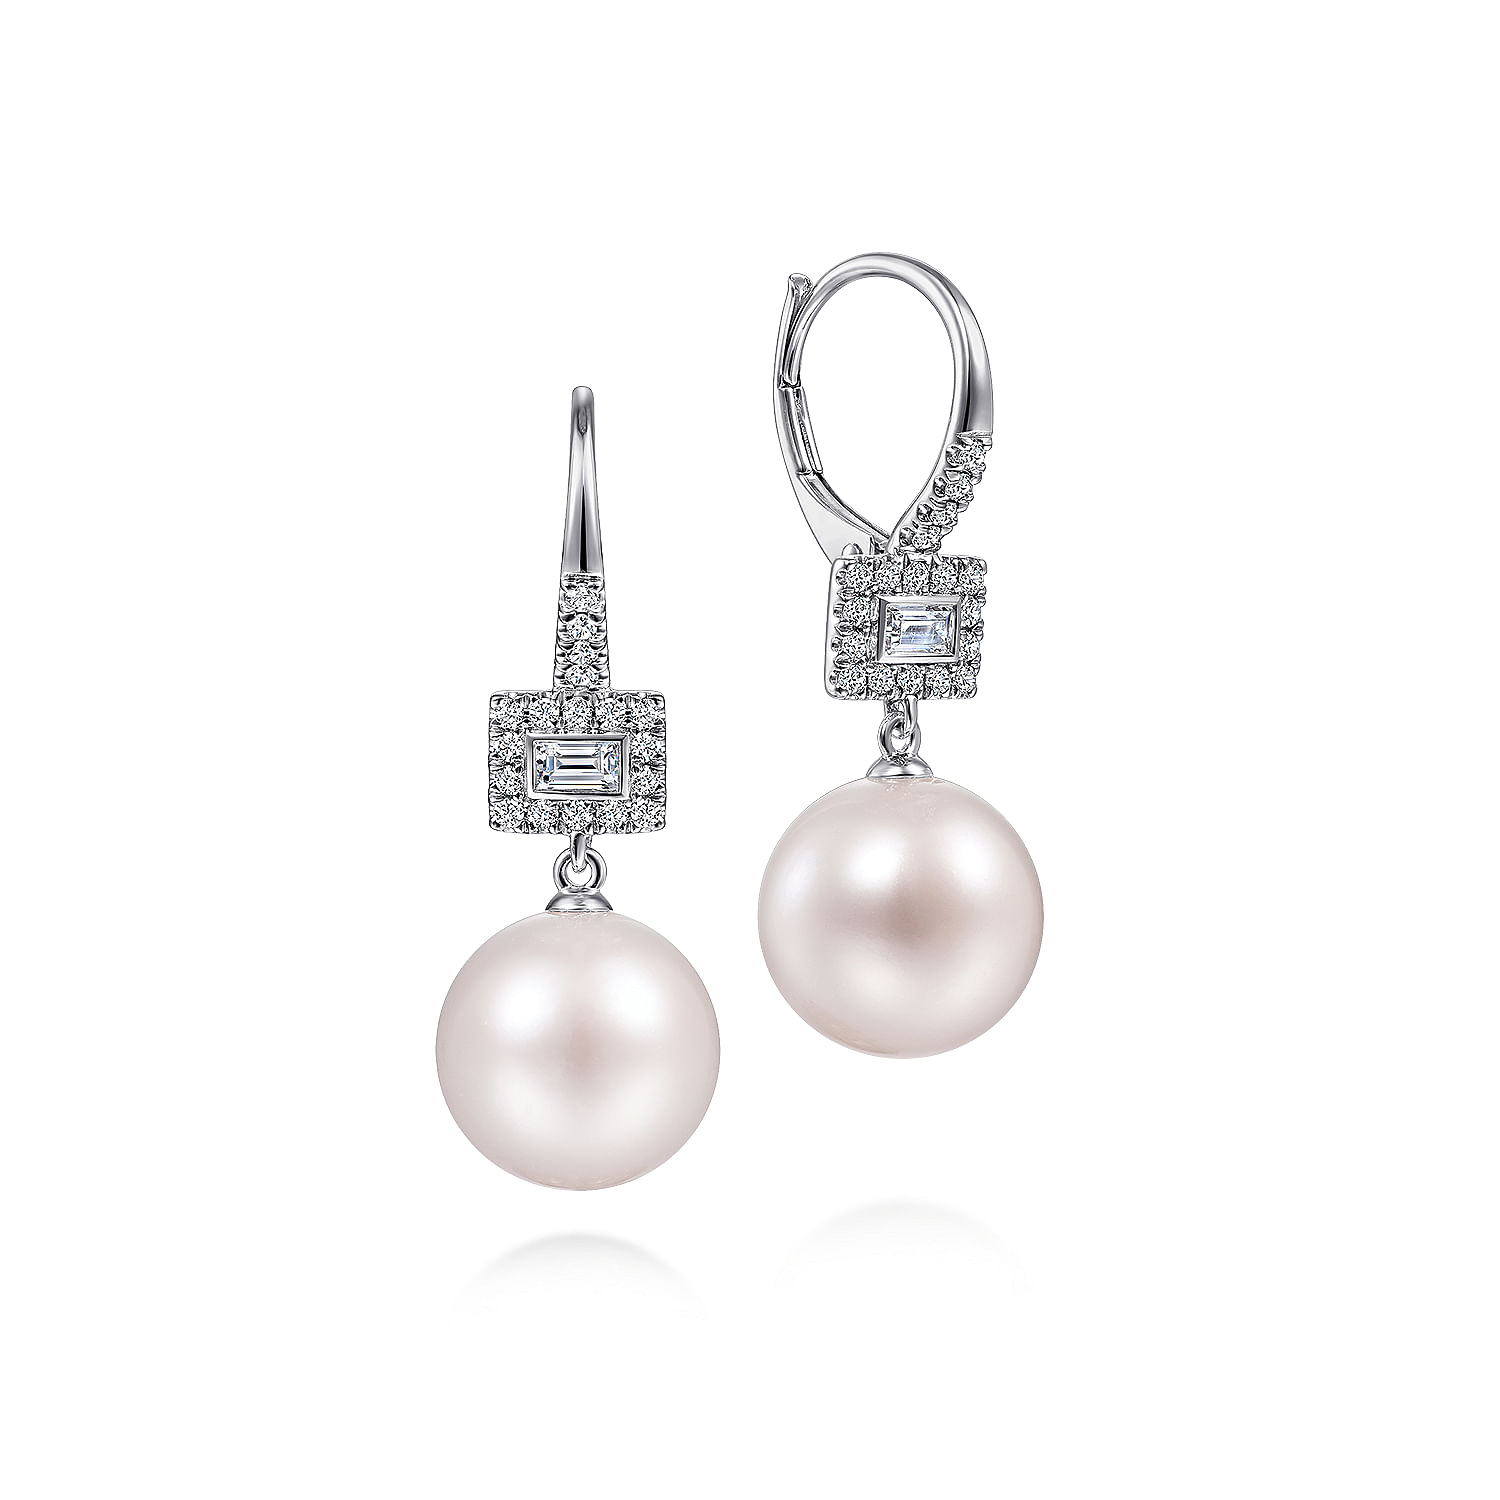 14K White Gold Diamond and Pearl Drop Earrings